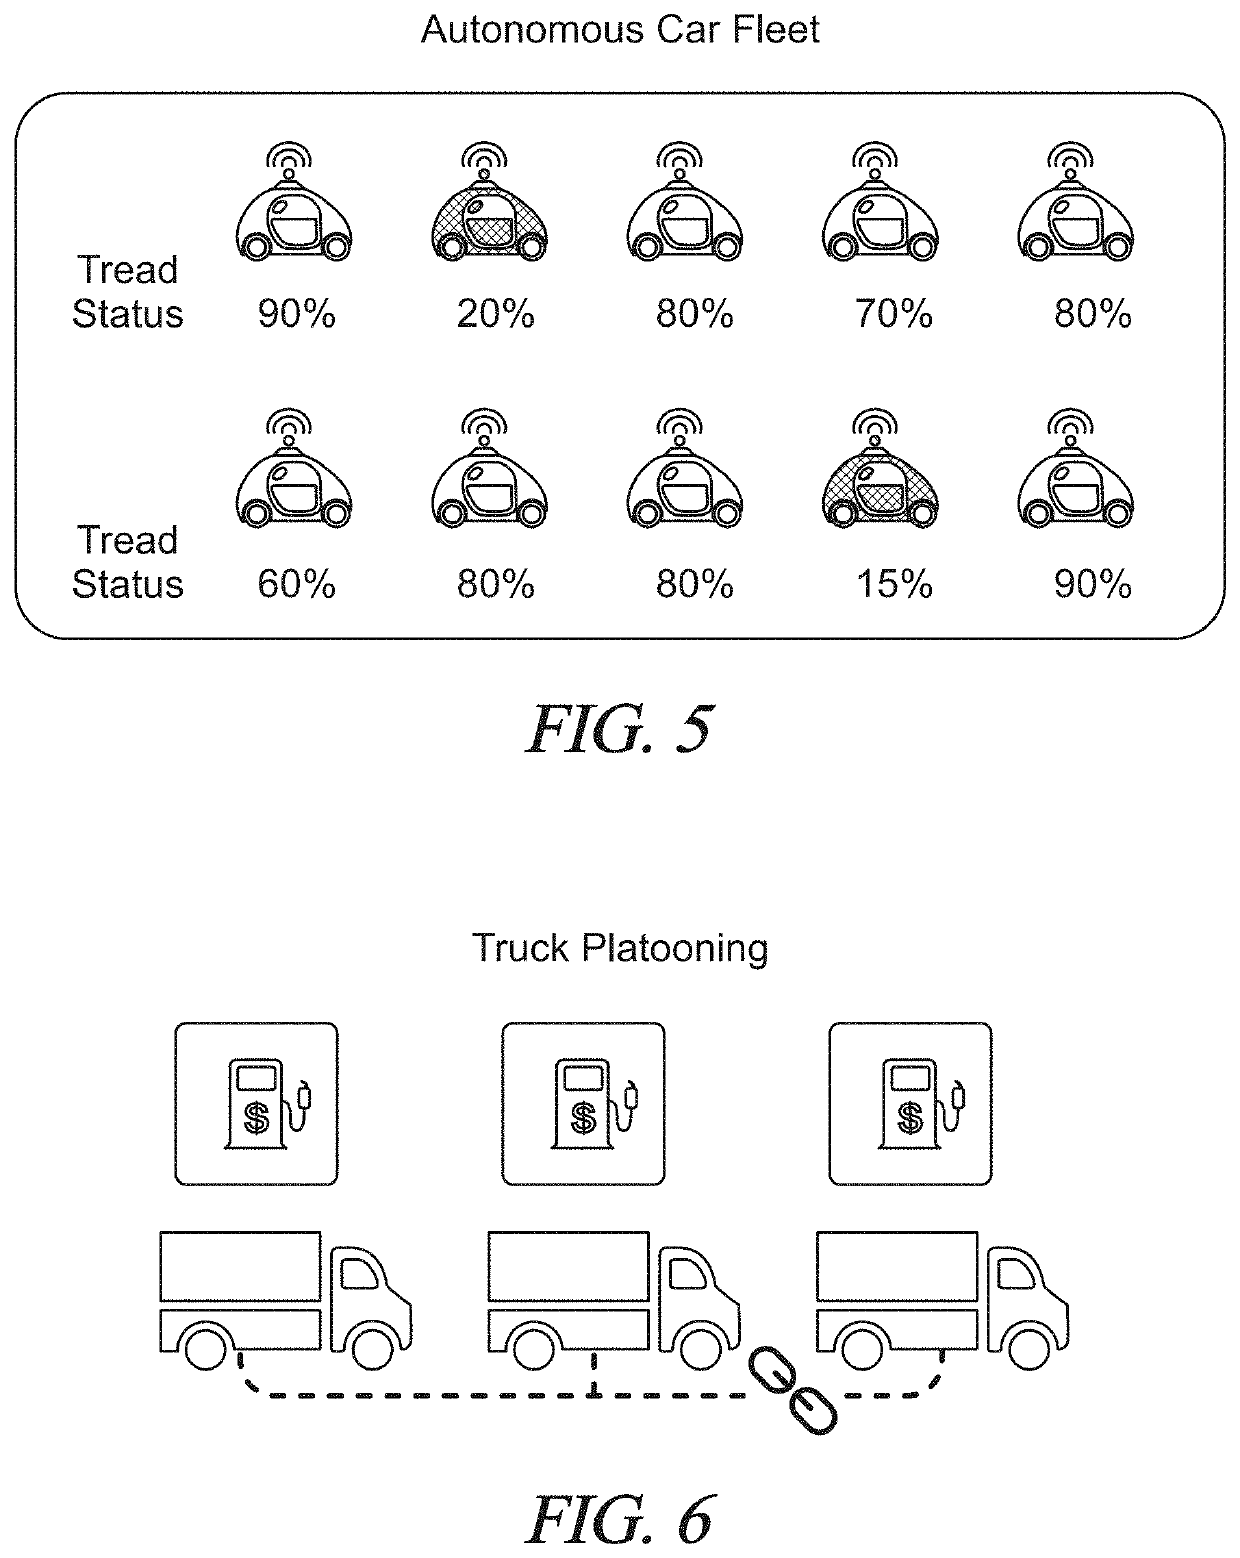 System and method for predicting tire traction capabilities and active safety applications